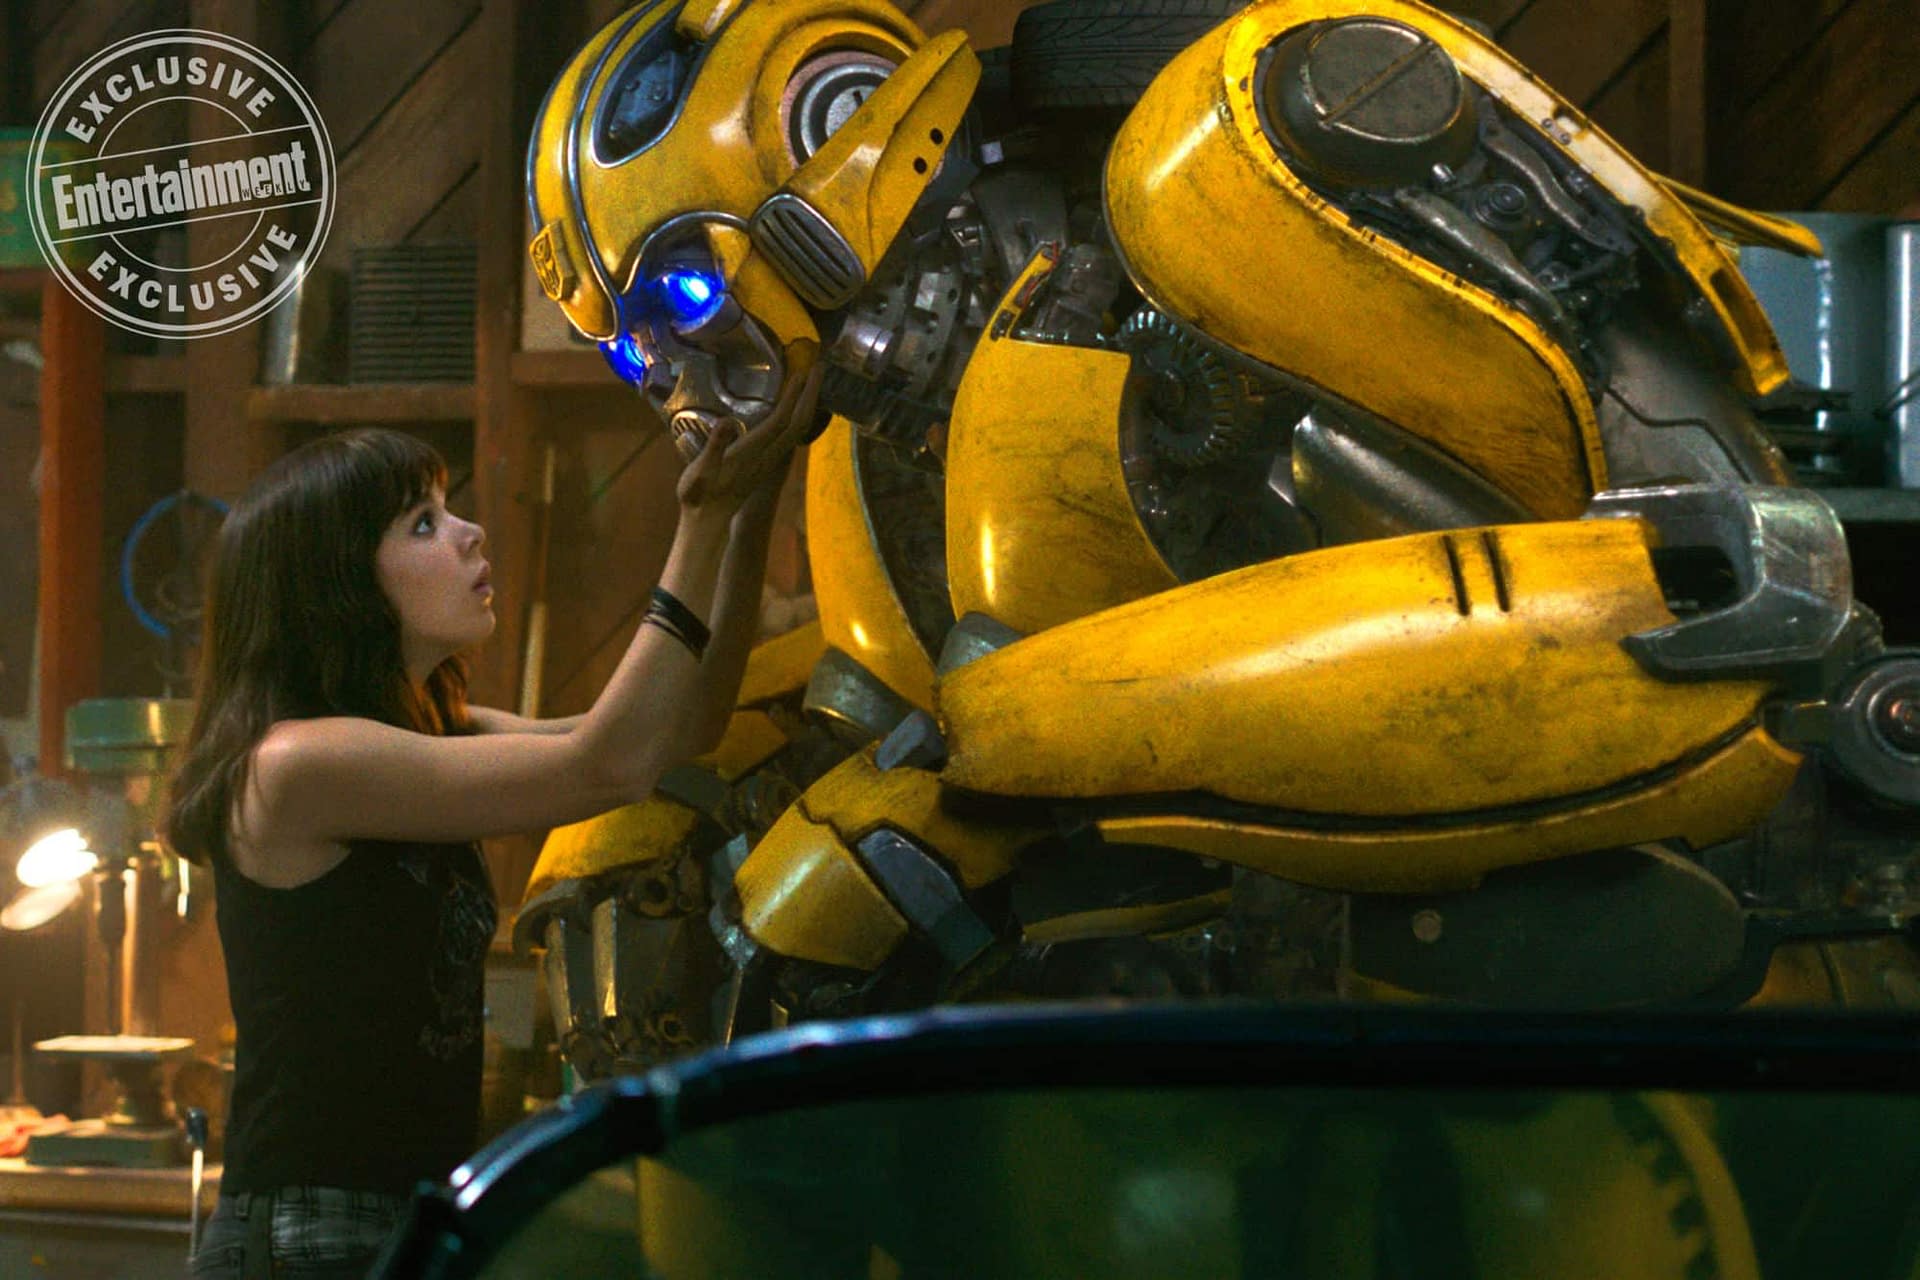 New Image from Bumblebee, and This One Is Adorable Too